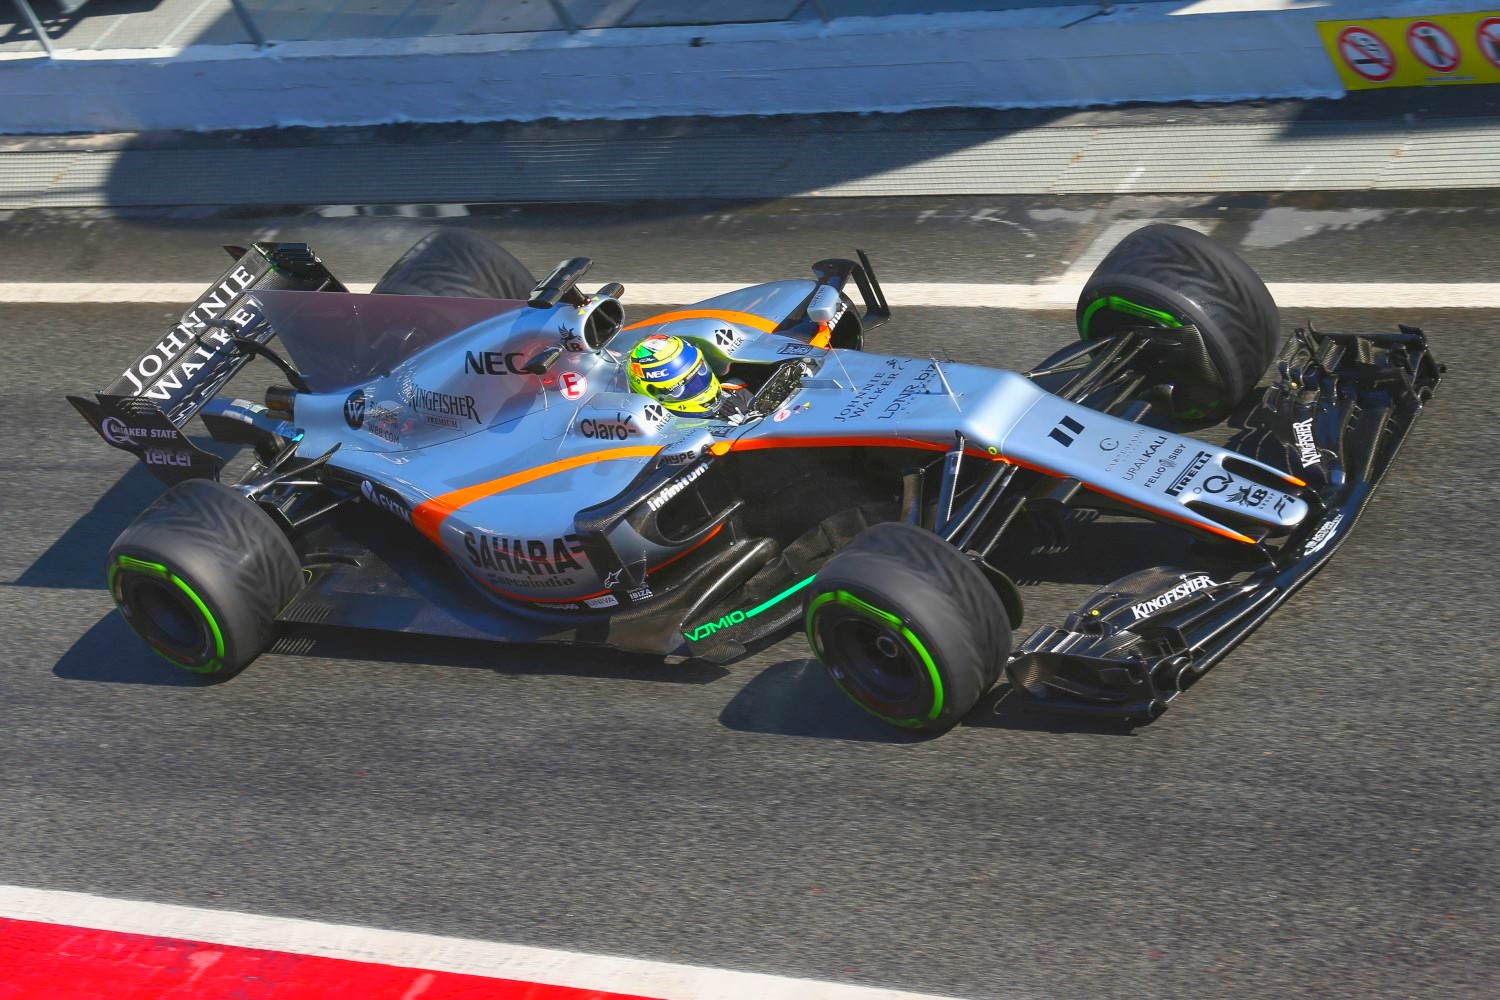 Perez in the Force India